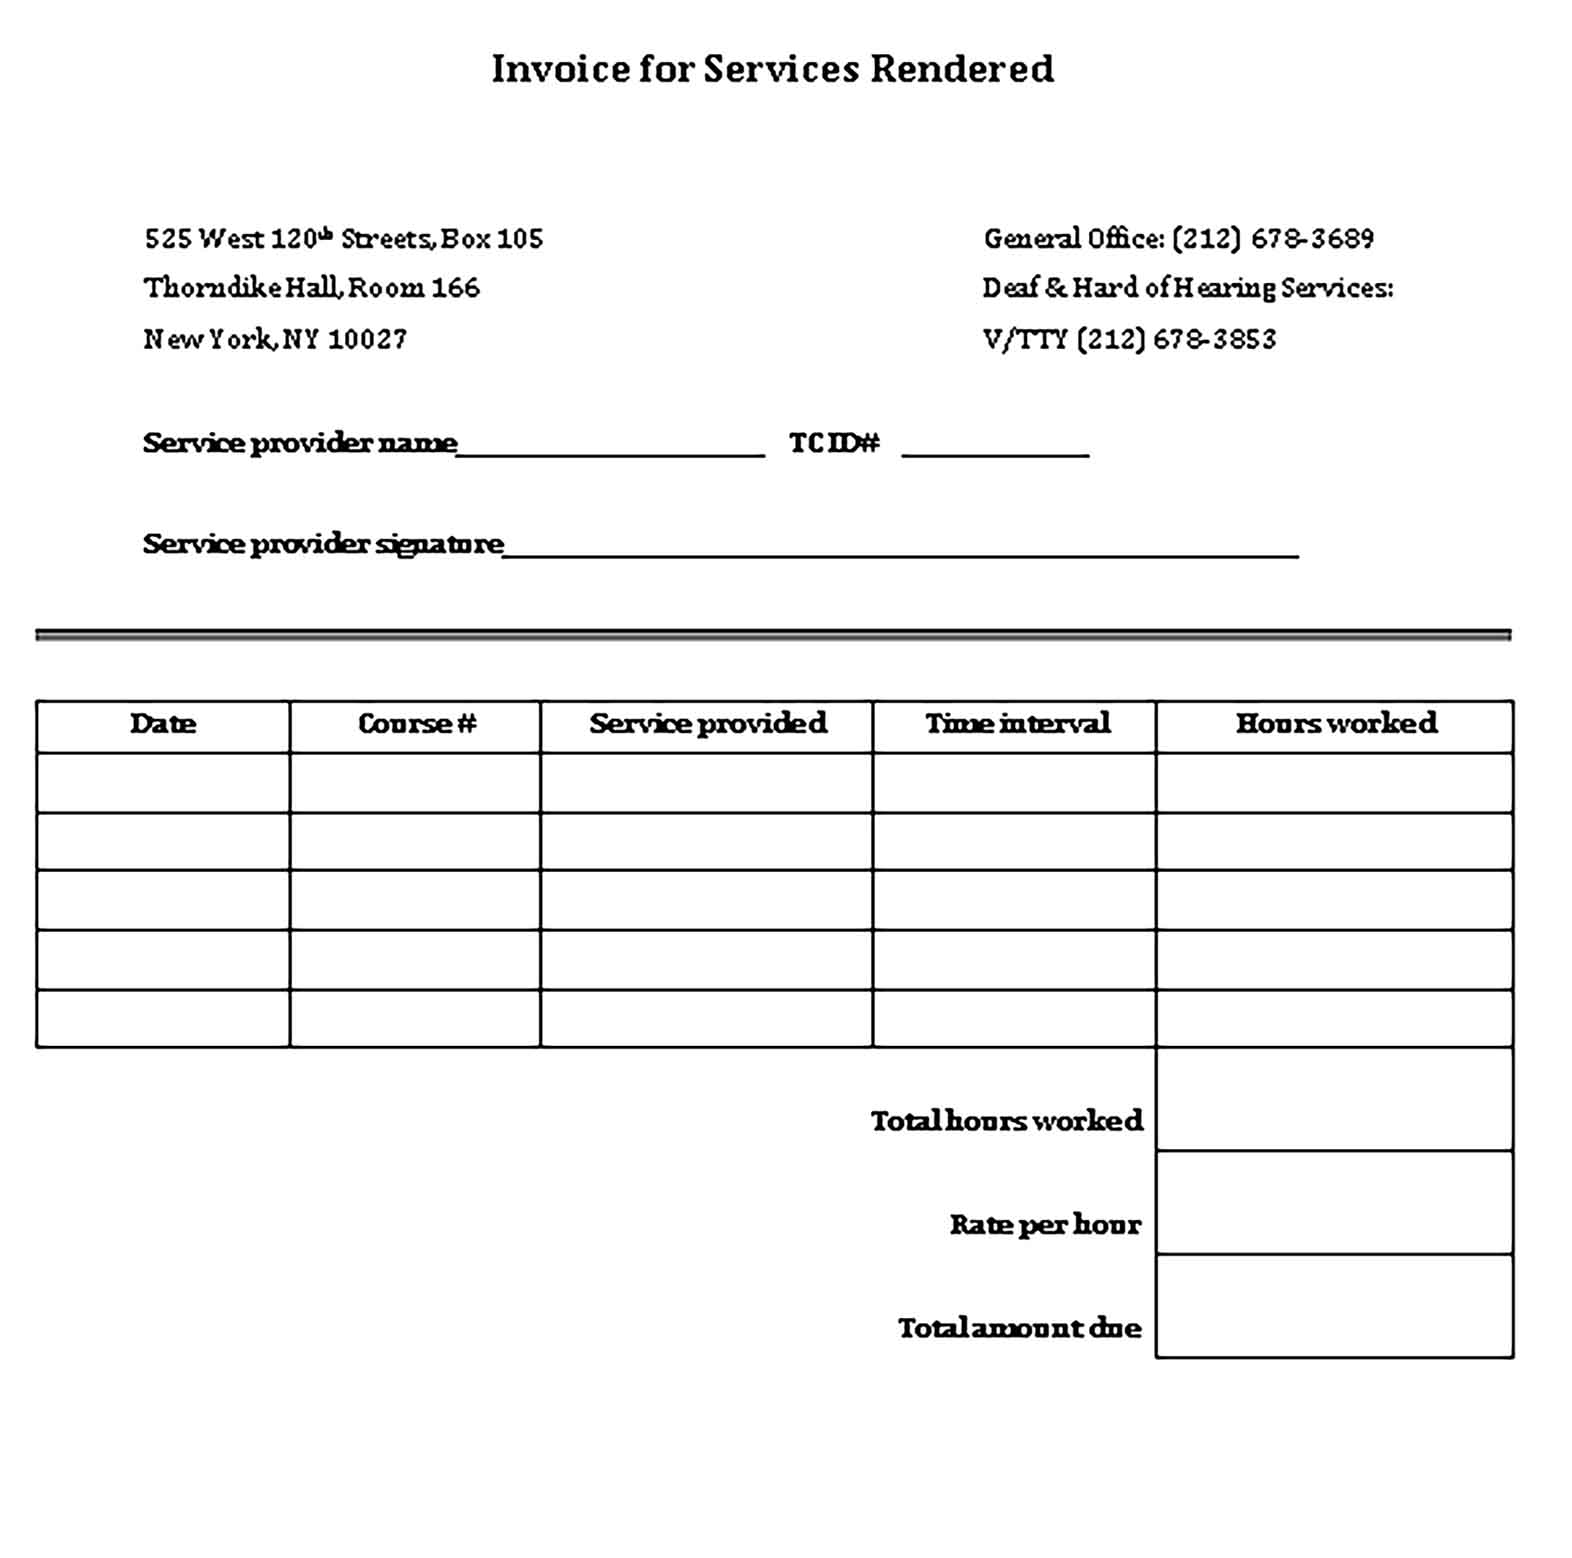 Sample Receipt for Services Rendered Word 1 Templates